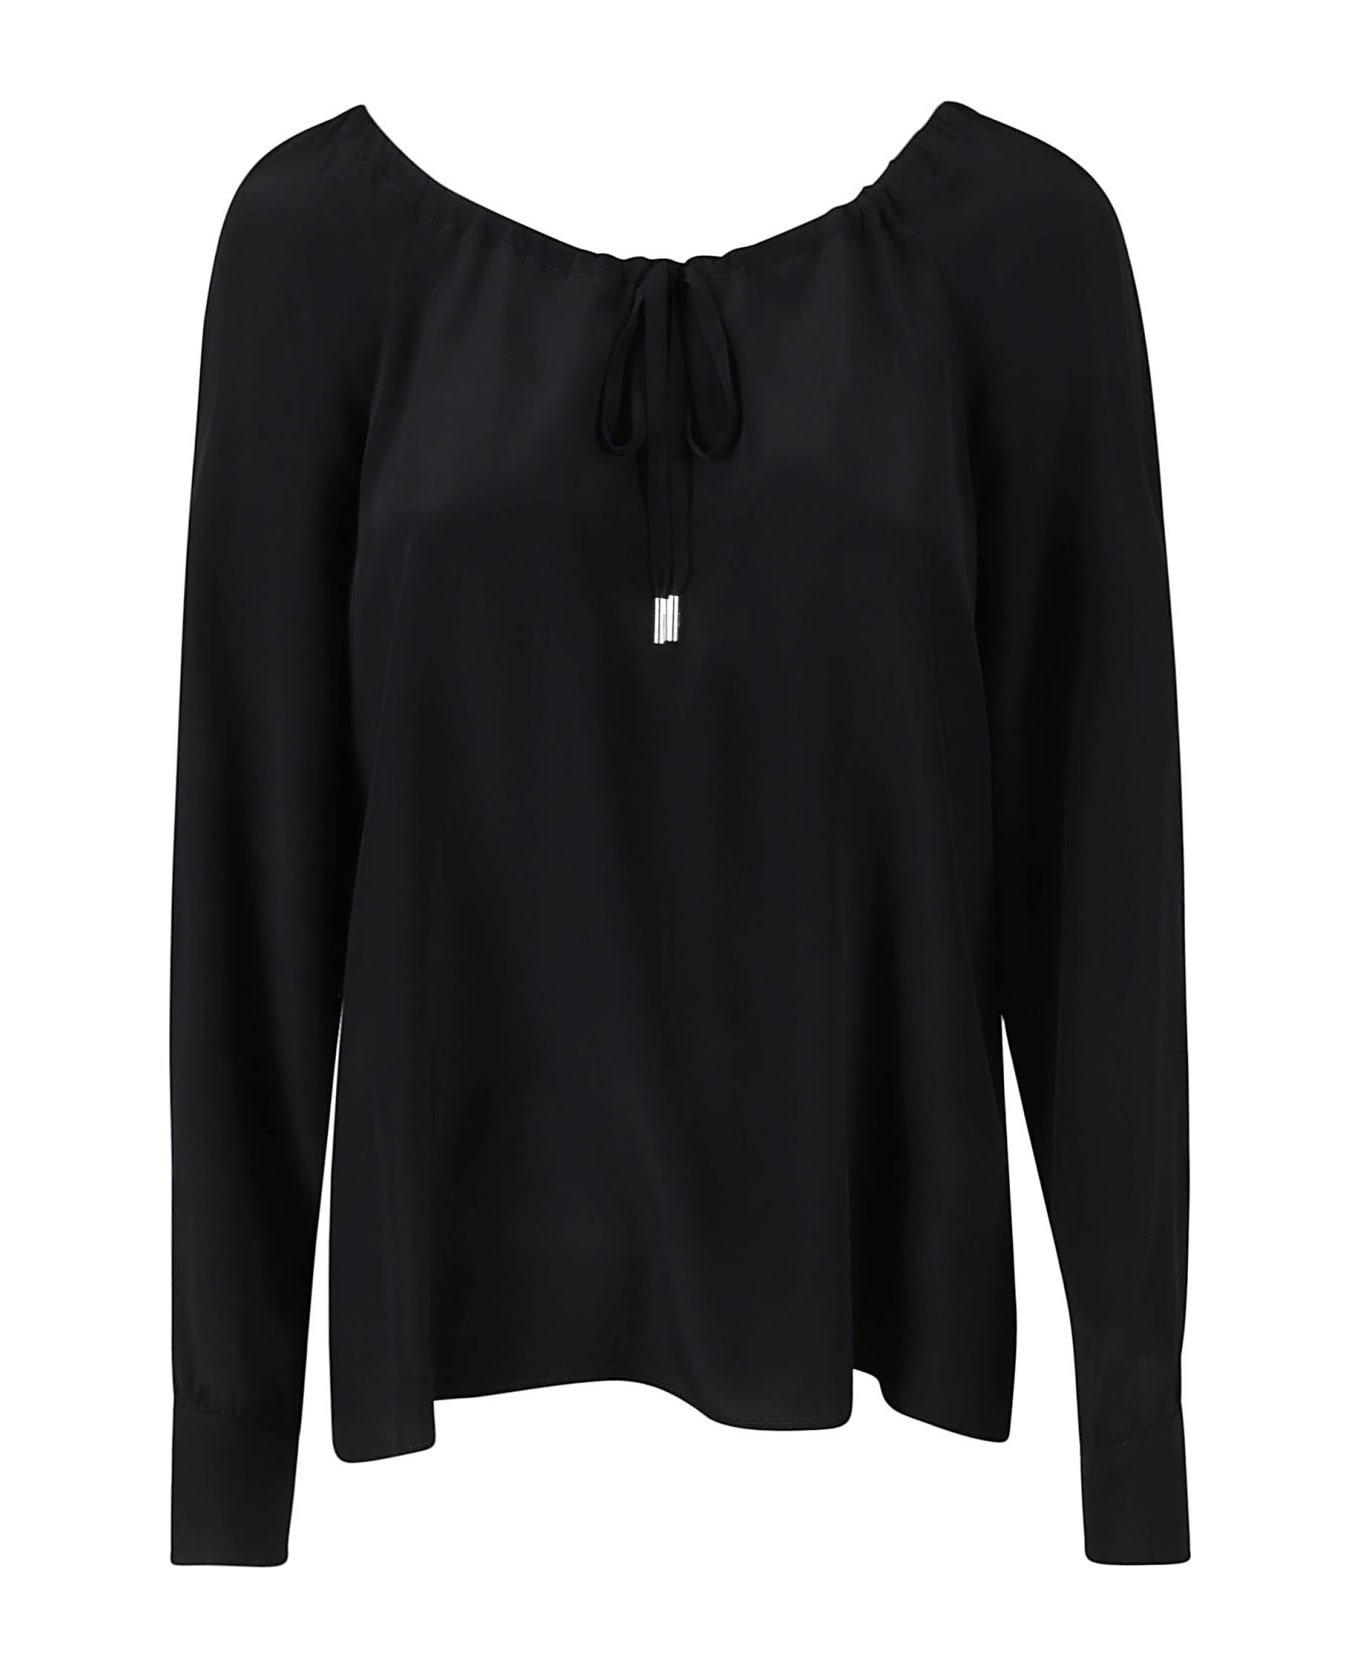 Boutique Moschino Boat Neck Blouse - Black